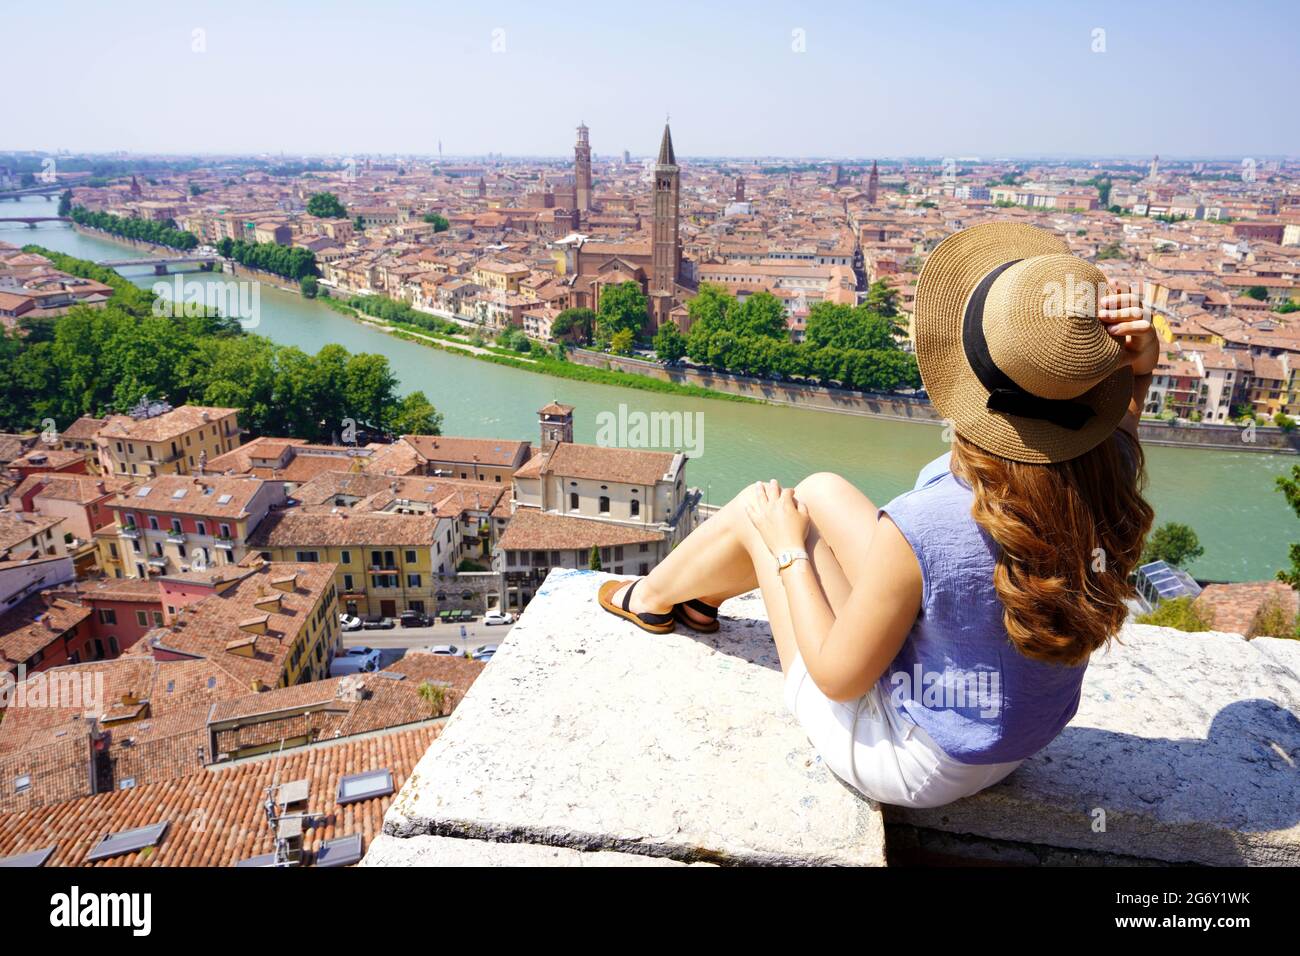 Travel destination Italy. Wide angle from belvedere of young woman sitting on wall enjoying stunning view of Verona, Italy. Stock Photo